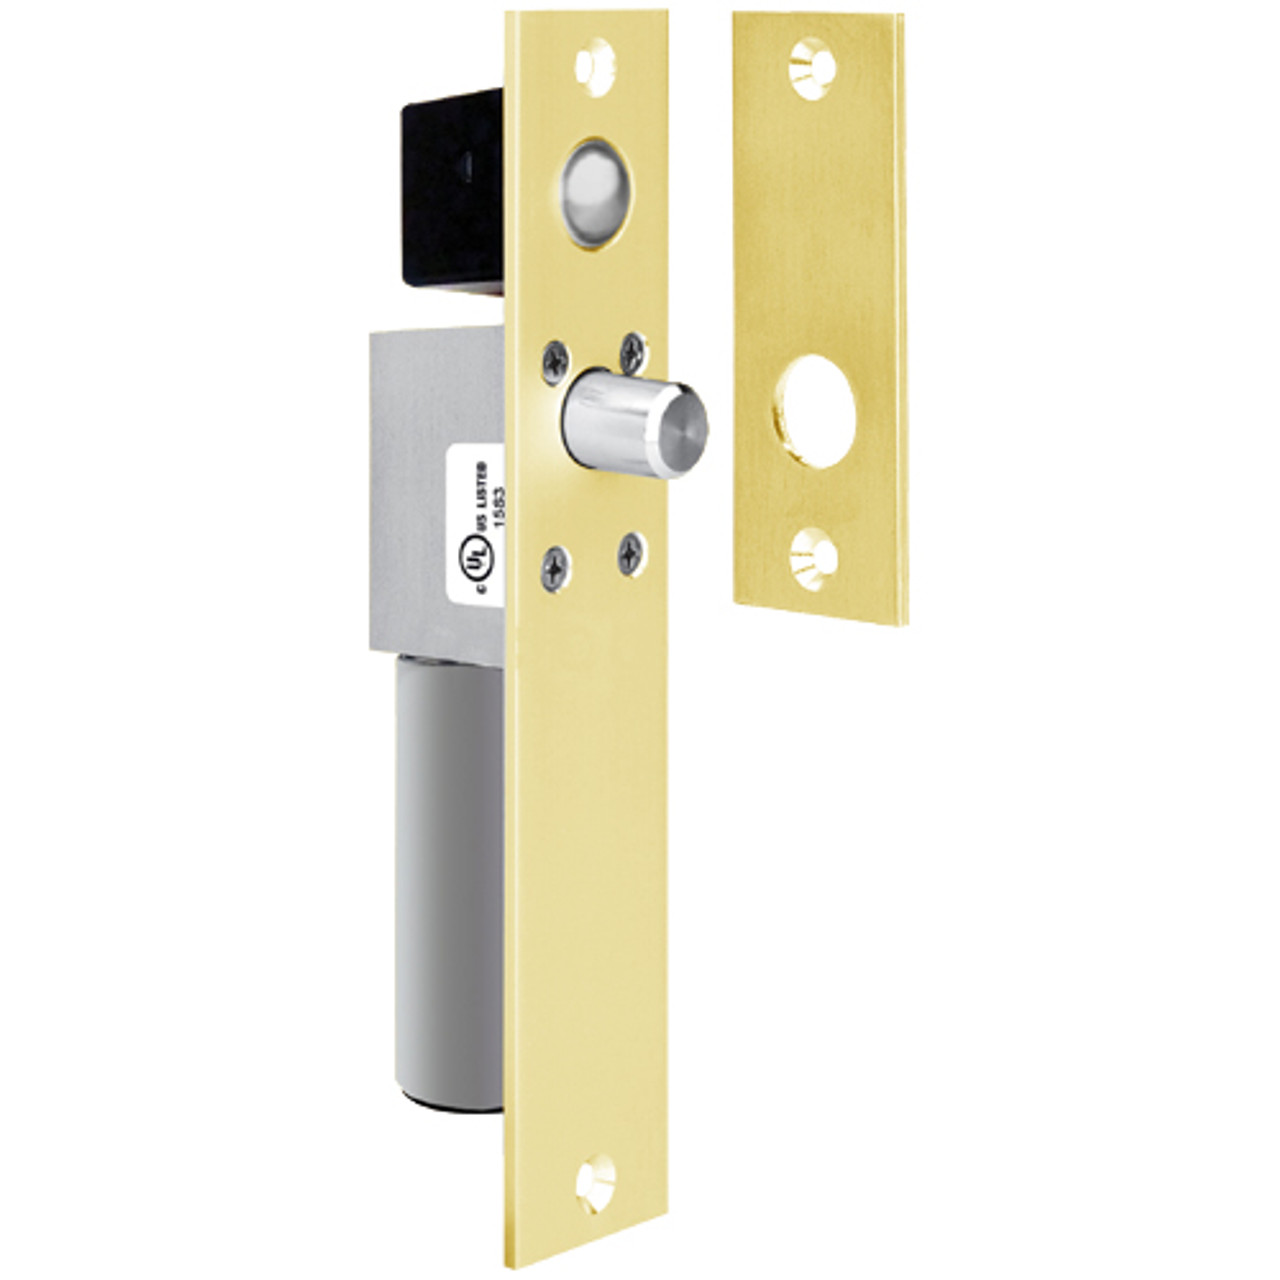 1490AICDB SDC Fits 1-1/2 inche Frame Non UL FailSafe Spacesaver Mortise Bolt Lock with Door Position and Bolt Position Sensor in Bright Brass